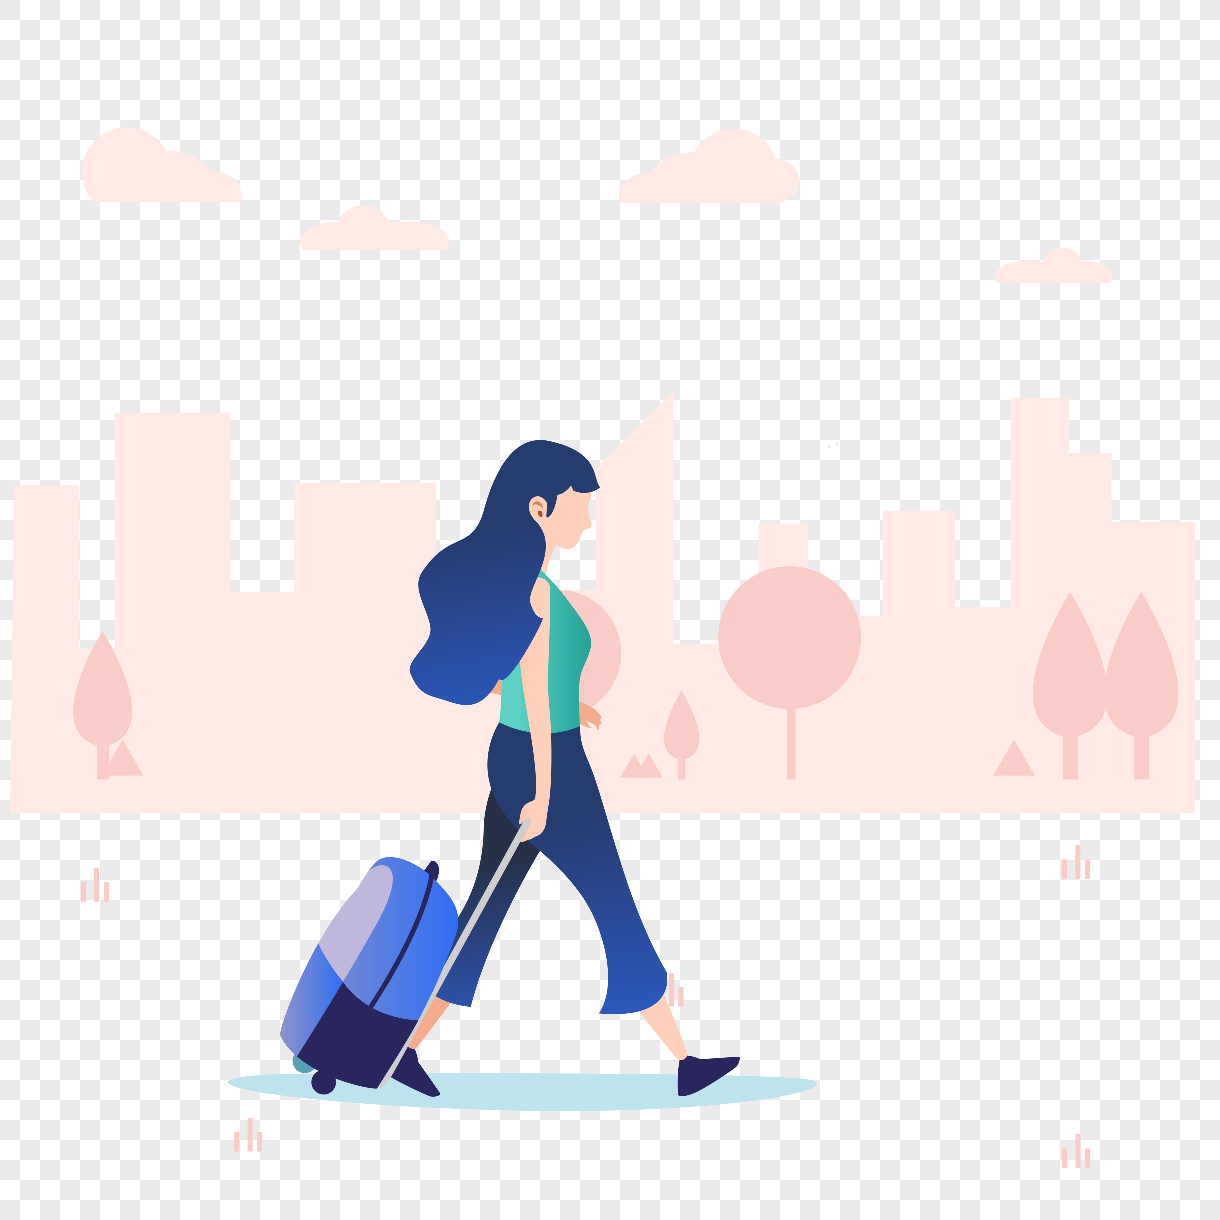 Travel icon free vector illustration material, material, icon, free materials png hd transparent image